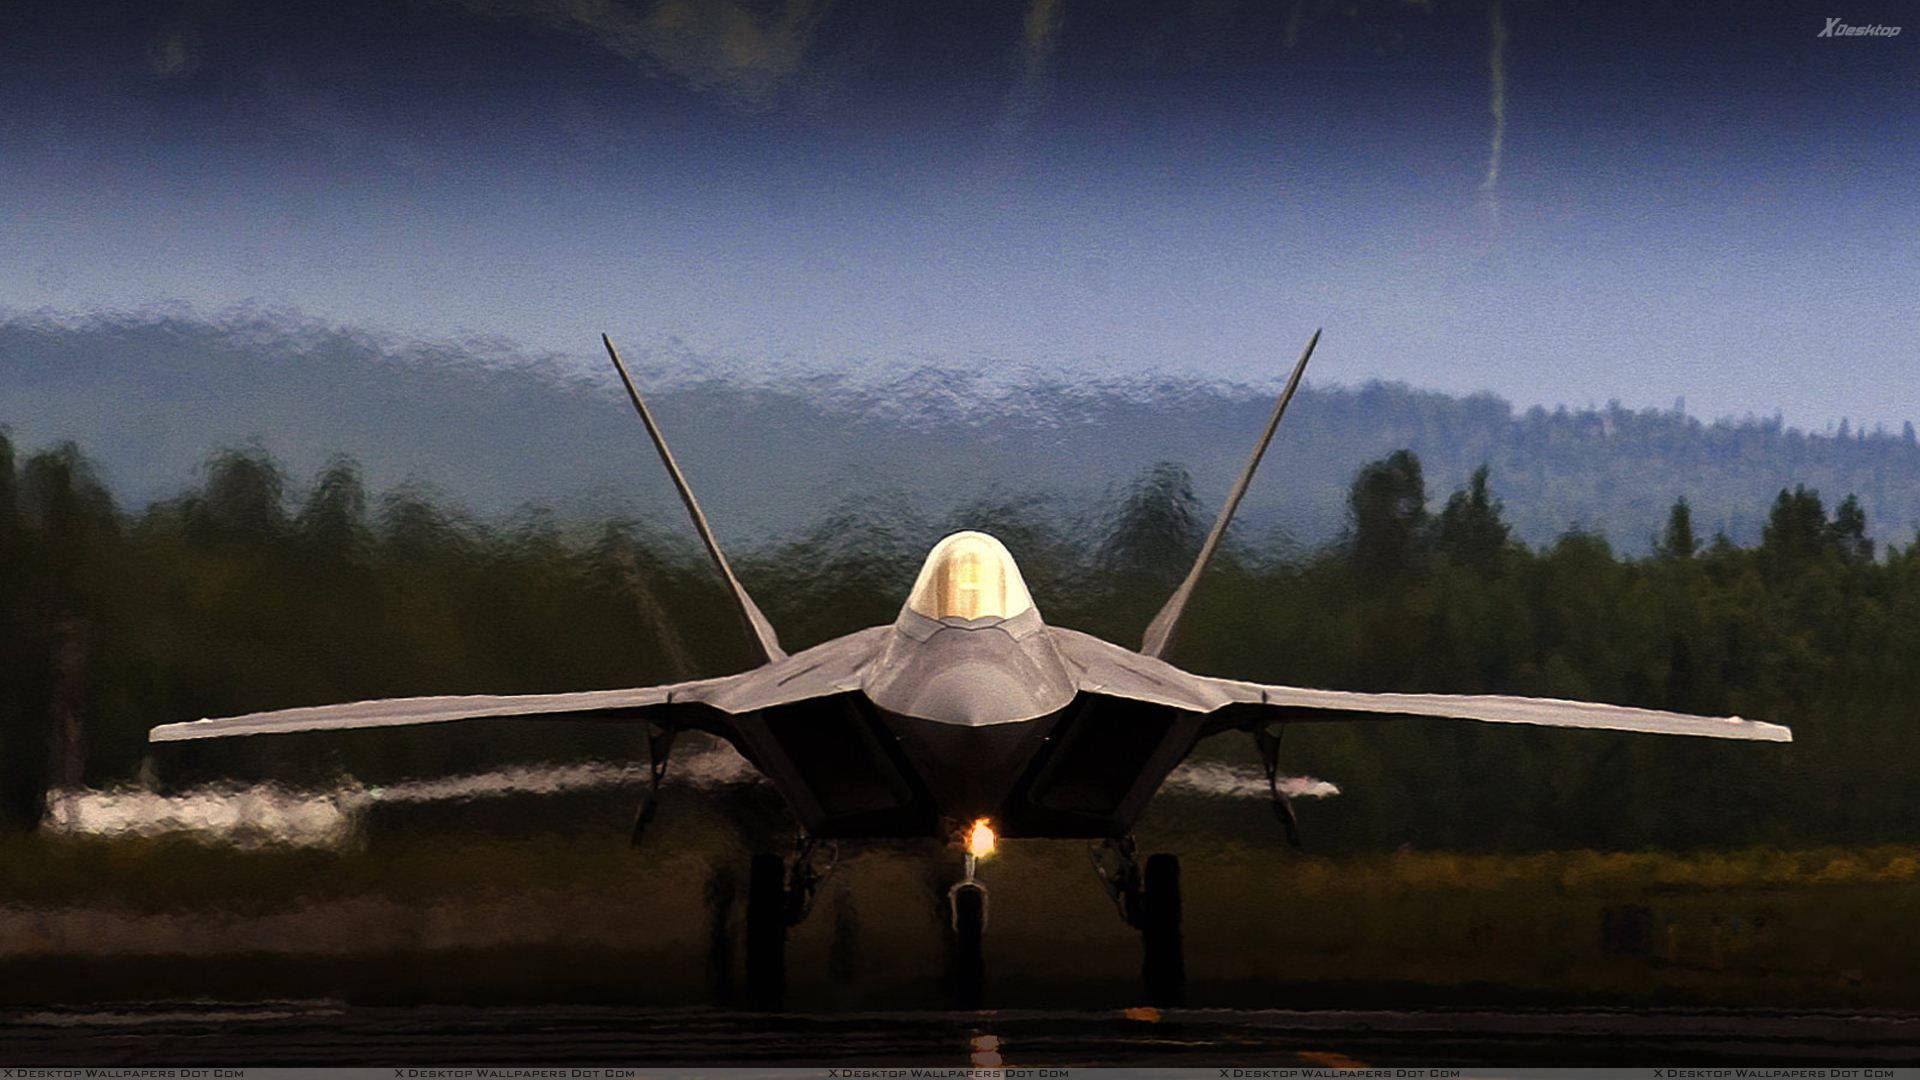 An Exquisite Display Of Power - F-22 Raptor Jet Fighter